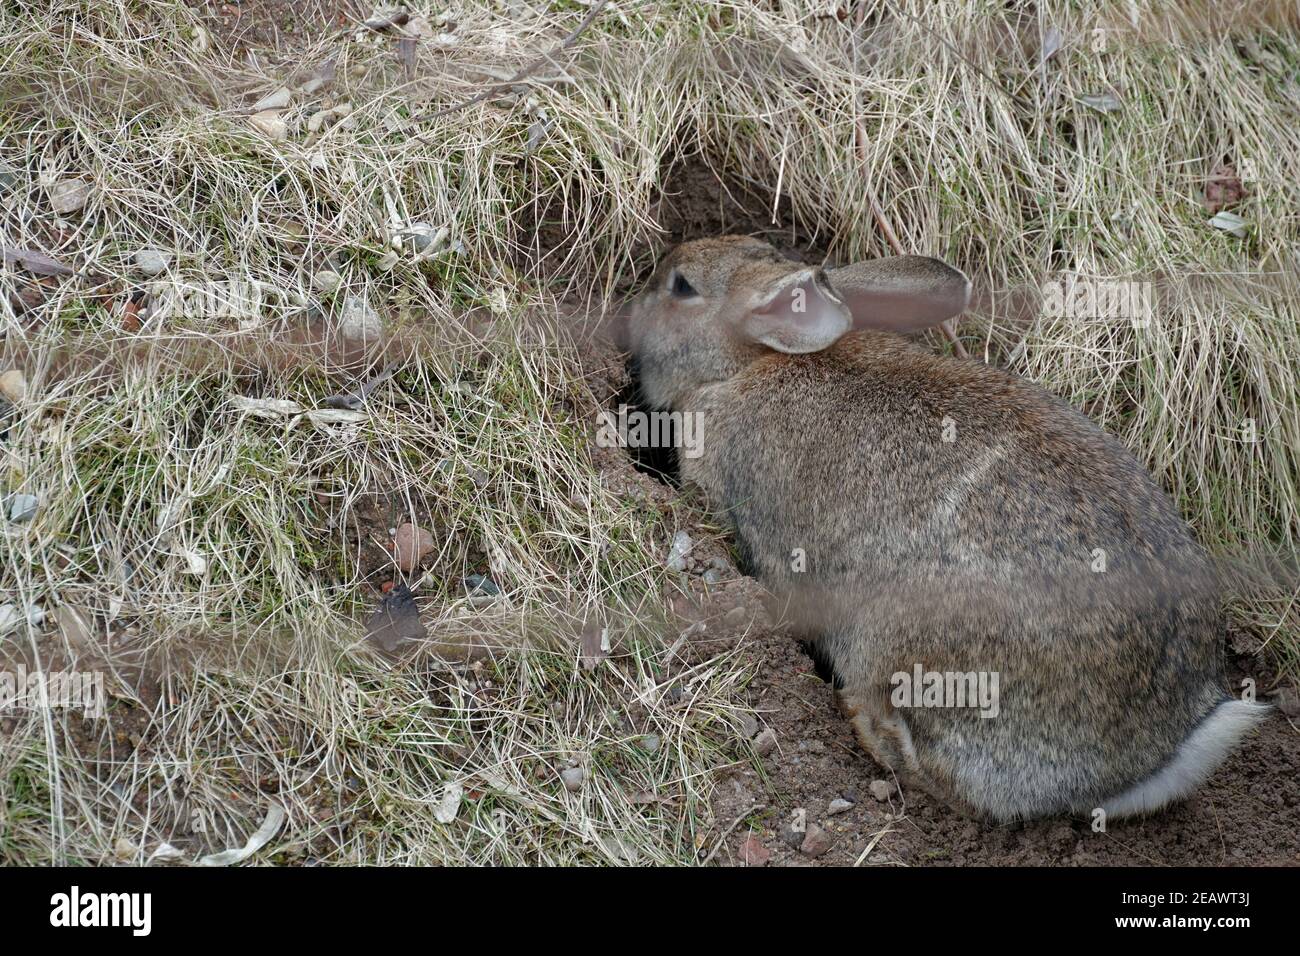 European rabbit entering a underground hole, its natural habitation. In Latin it is called Oryctolagus cuniculus. There is a lot of copy space. Stock Photo